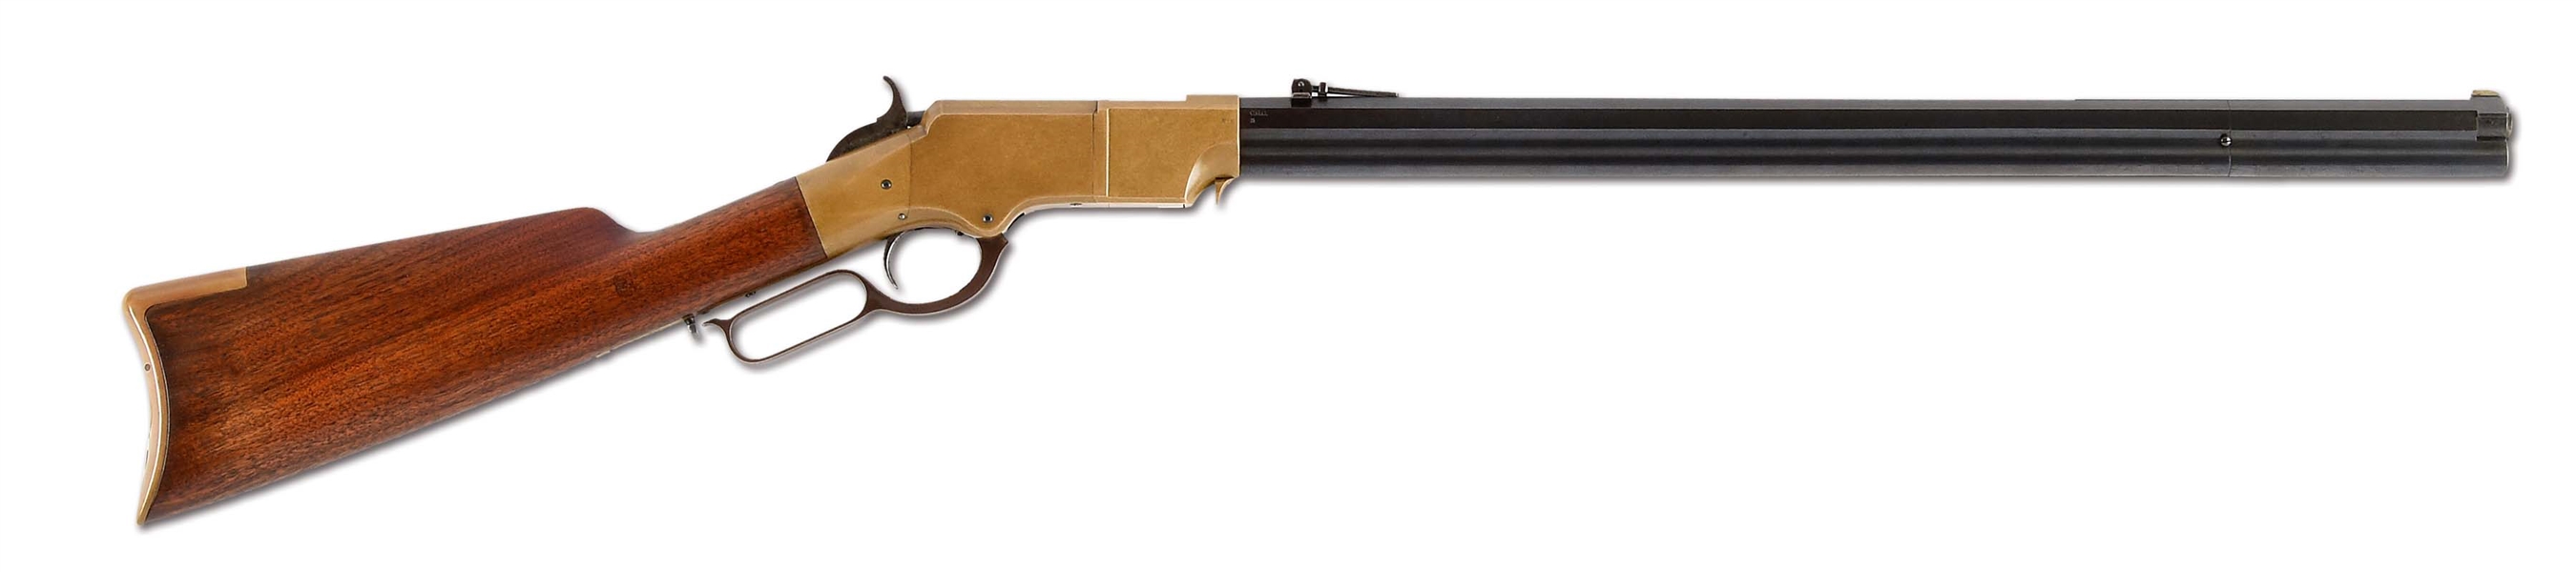 (A) EXTRAORDINARY MARTIALLY MARKED HENRY REPEATING RIFLE (1863).